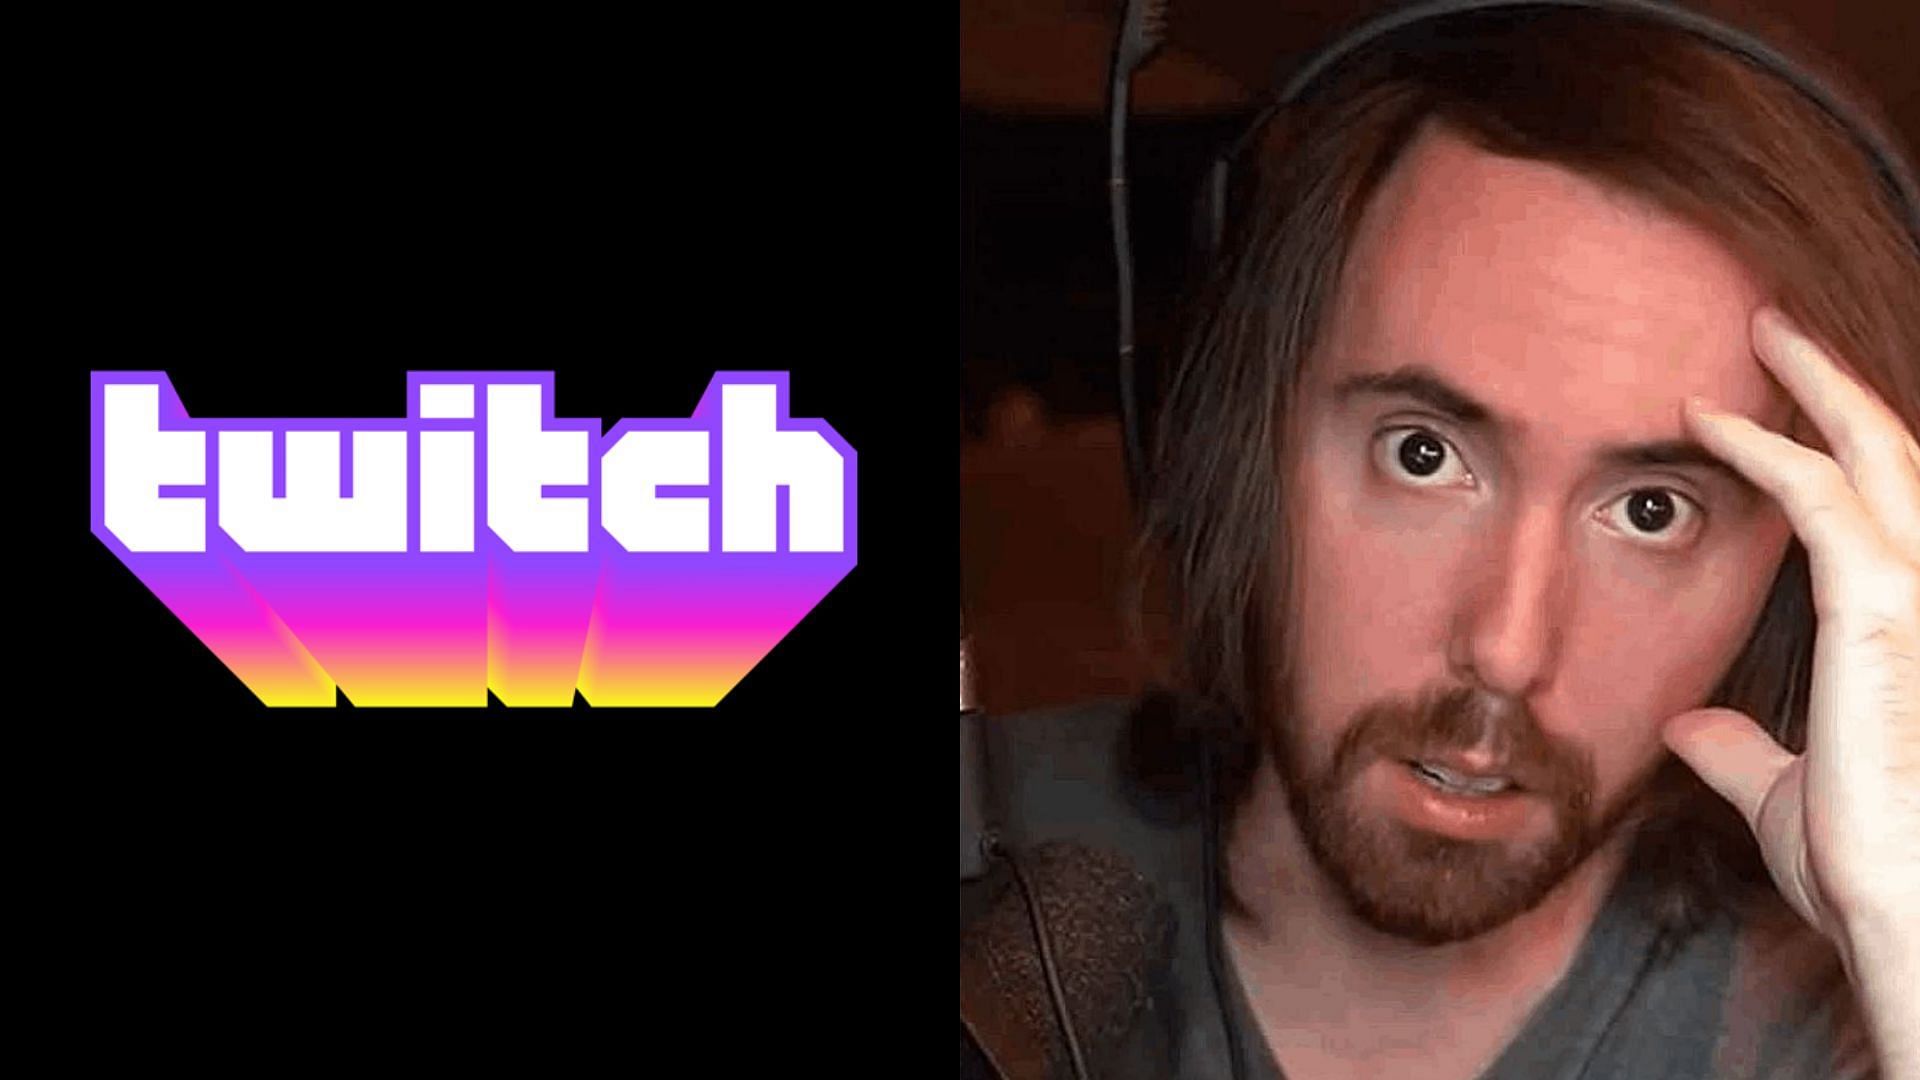 Asmongold reacts to people comparing gambling to mature content on Twitch (Image via Twitch, zackrawrr/Twitch)